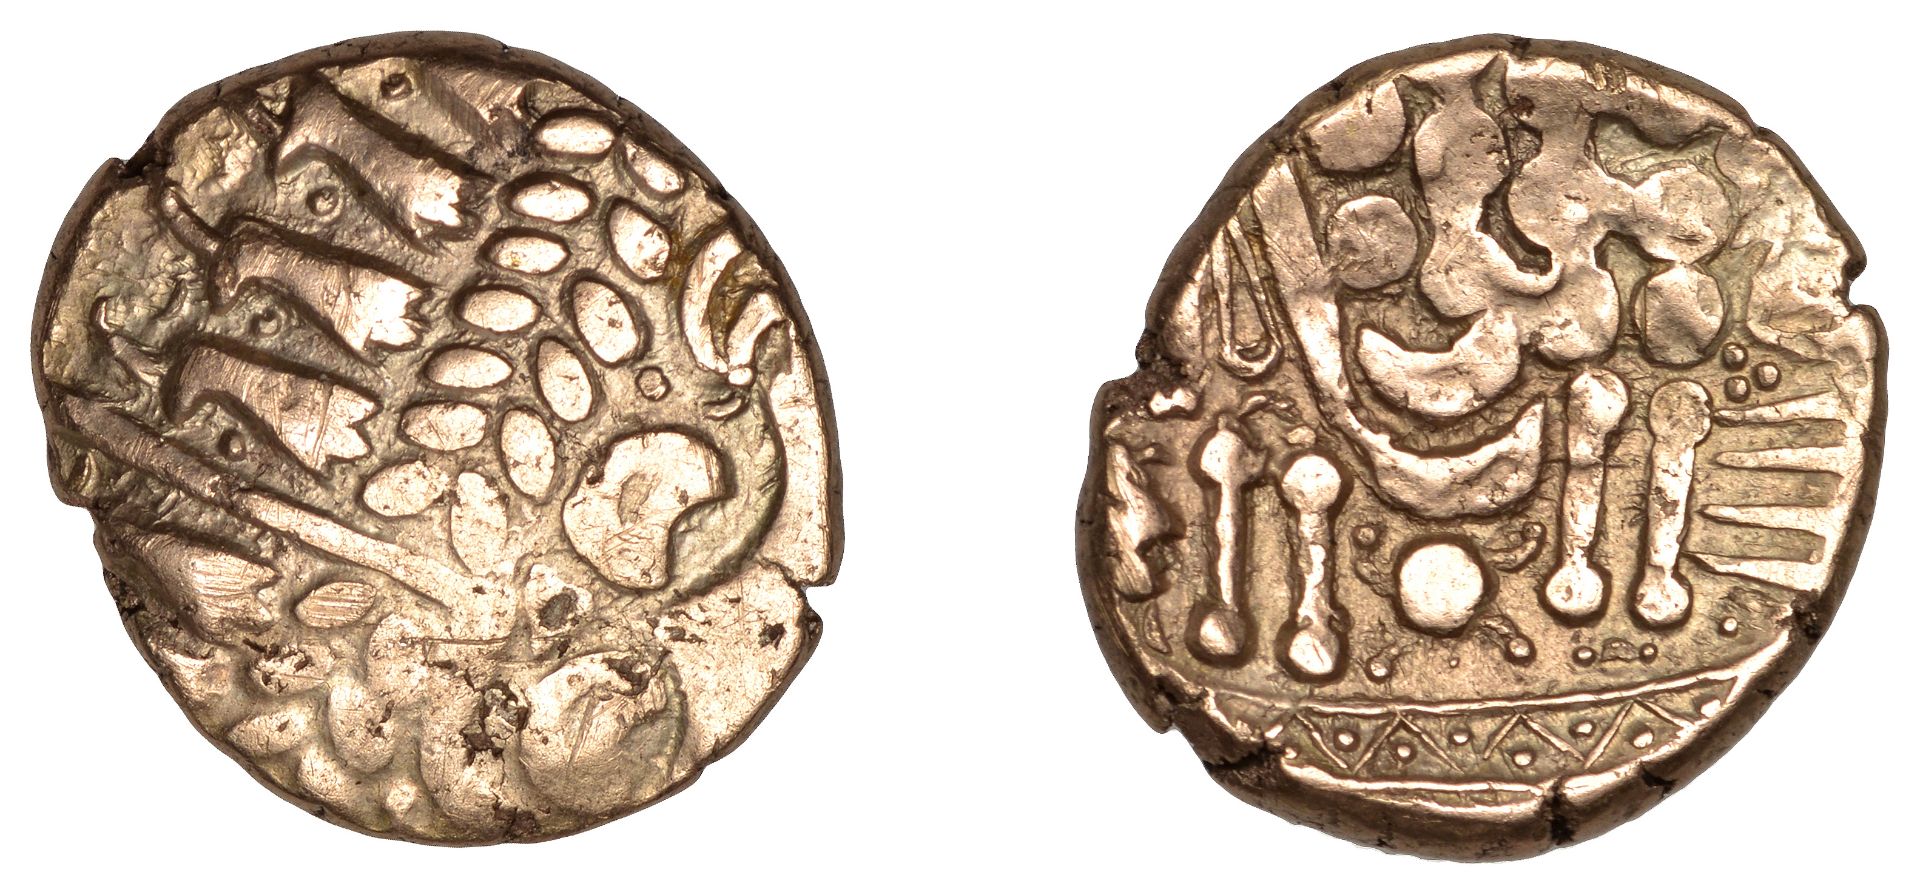 BELGAE, Early Uninscribed issues, Stater, British D [Chute/Cheriton transitional type], degr...